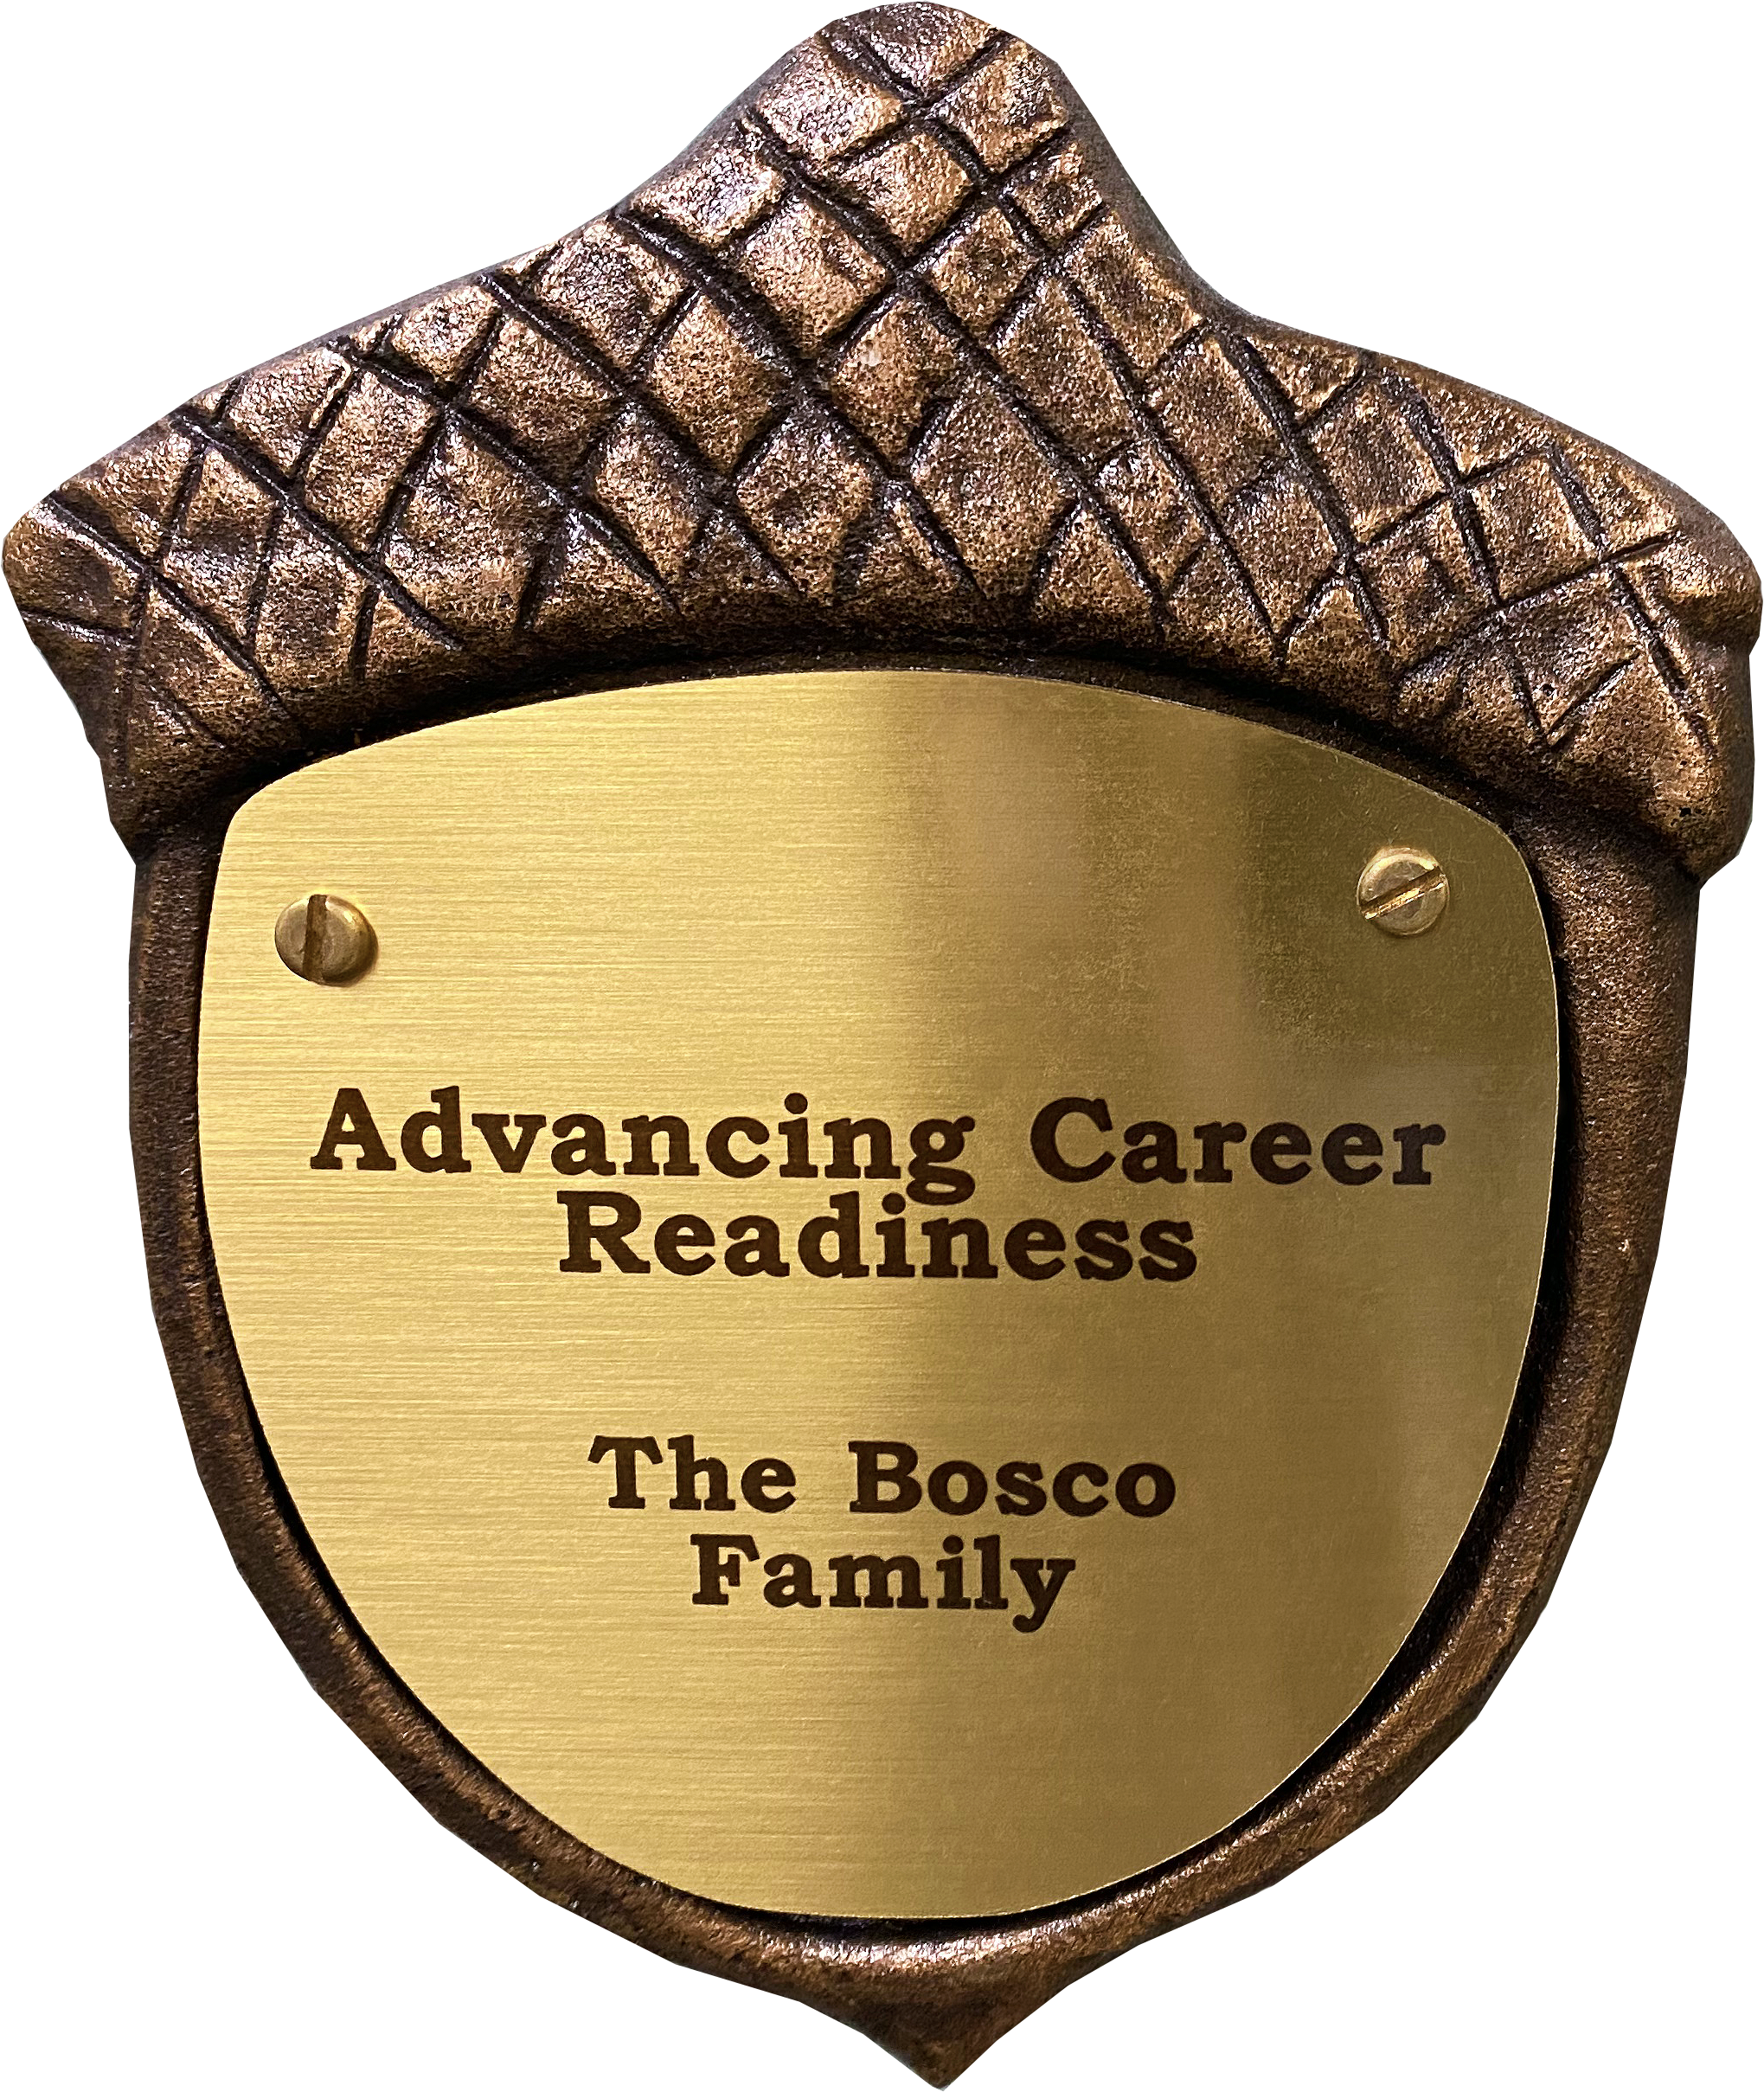 Inscribed bronze plaque in the shape of an acorn with text on it reading: Advancing Career Readiness. The Bosco Family